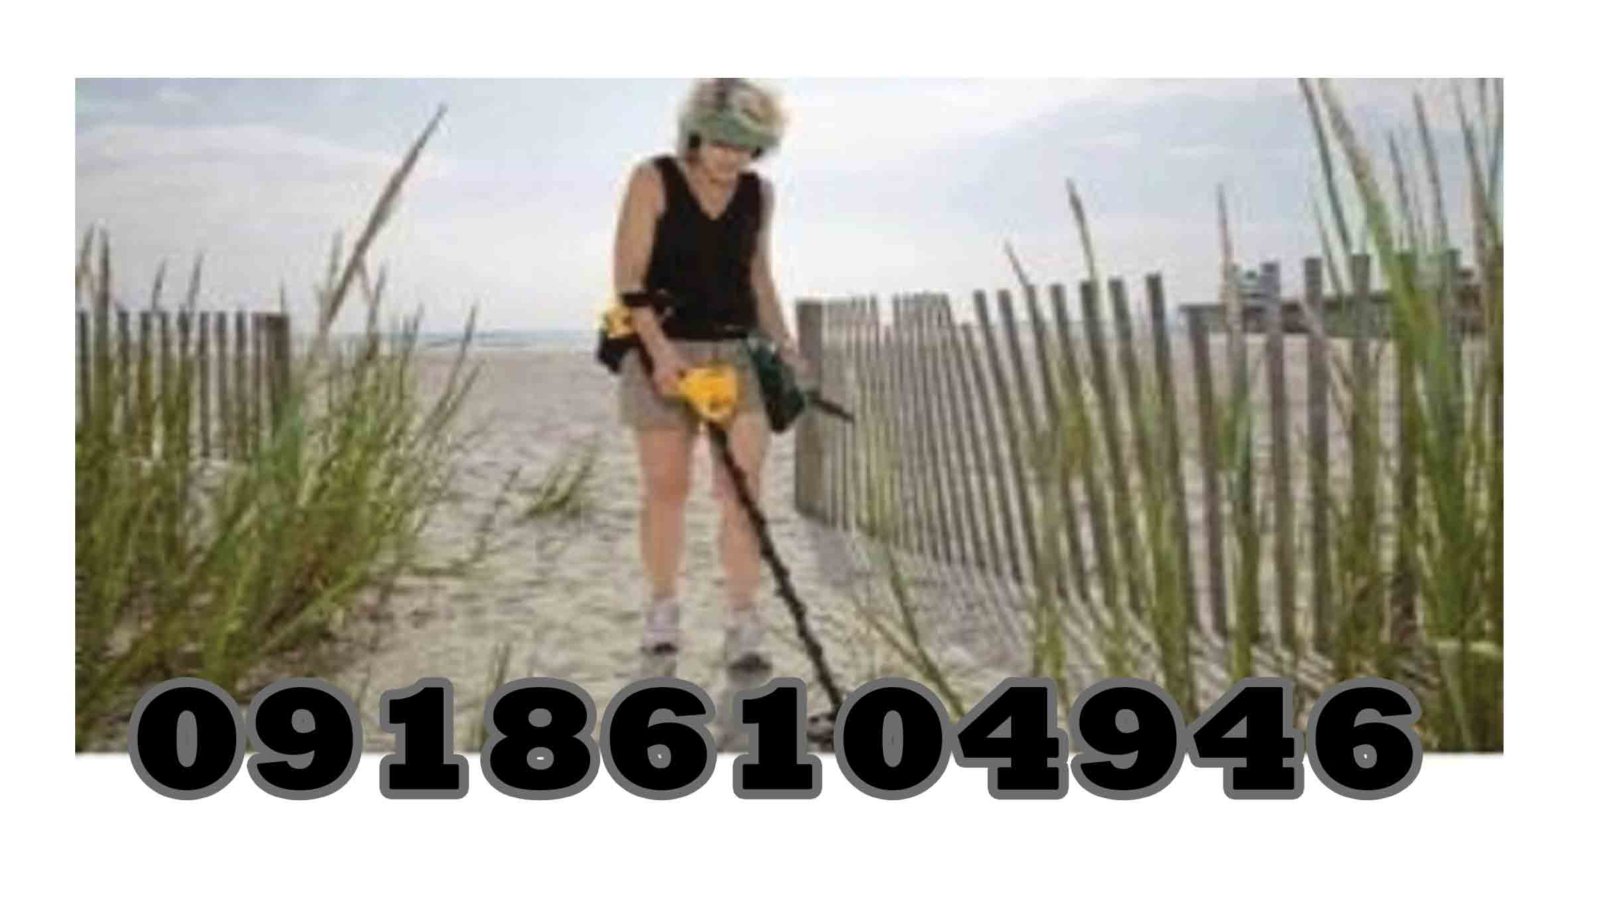 The most important factors for buying a metal detector